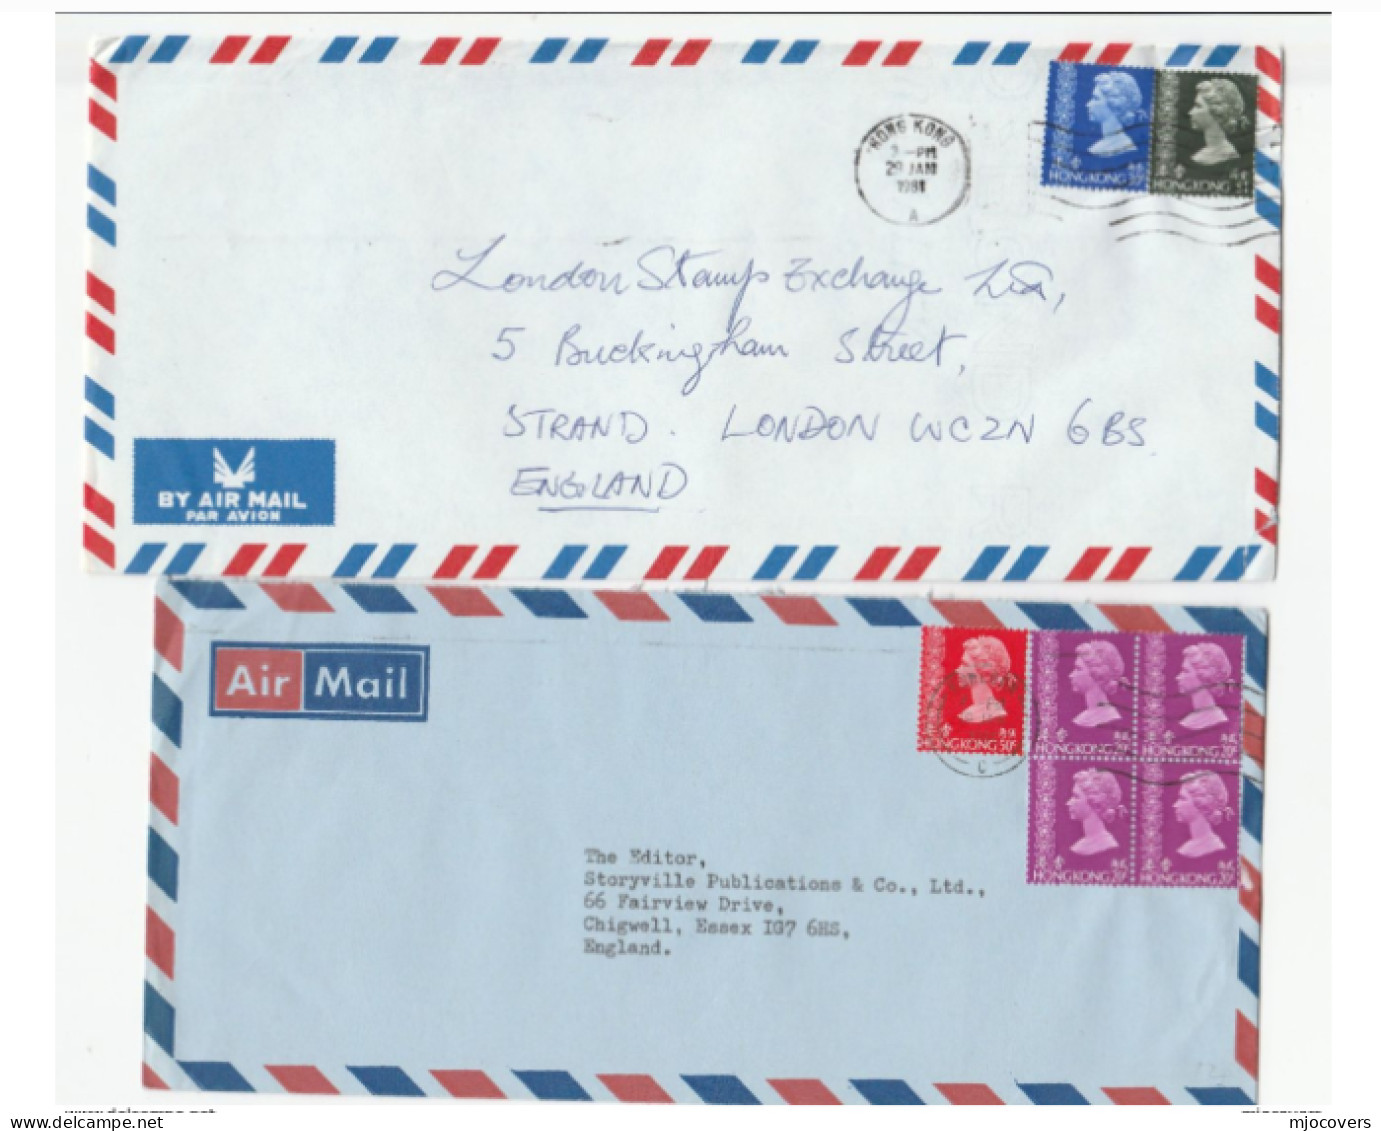 Collection 5 X Diff Franking HONG KONG Covers 1970s- 1990s AIR MAIL  To GB  China Cover Stamps - Brieven En Documenten